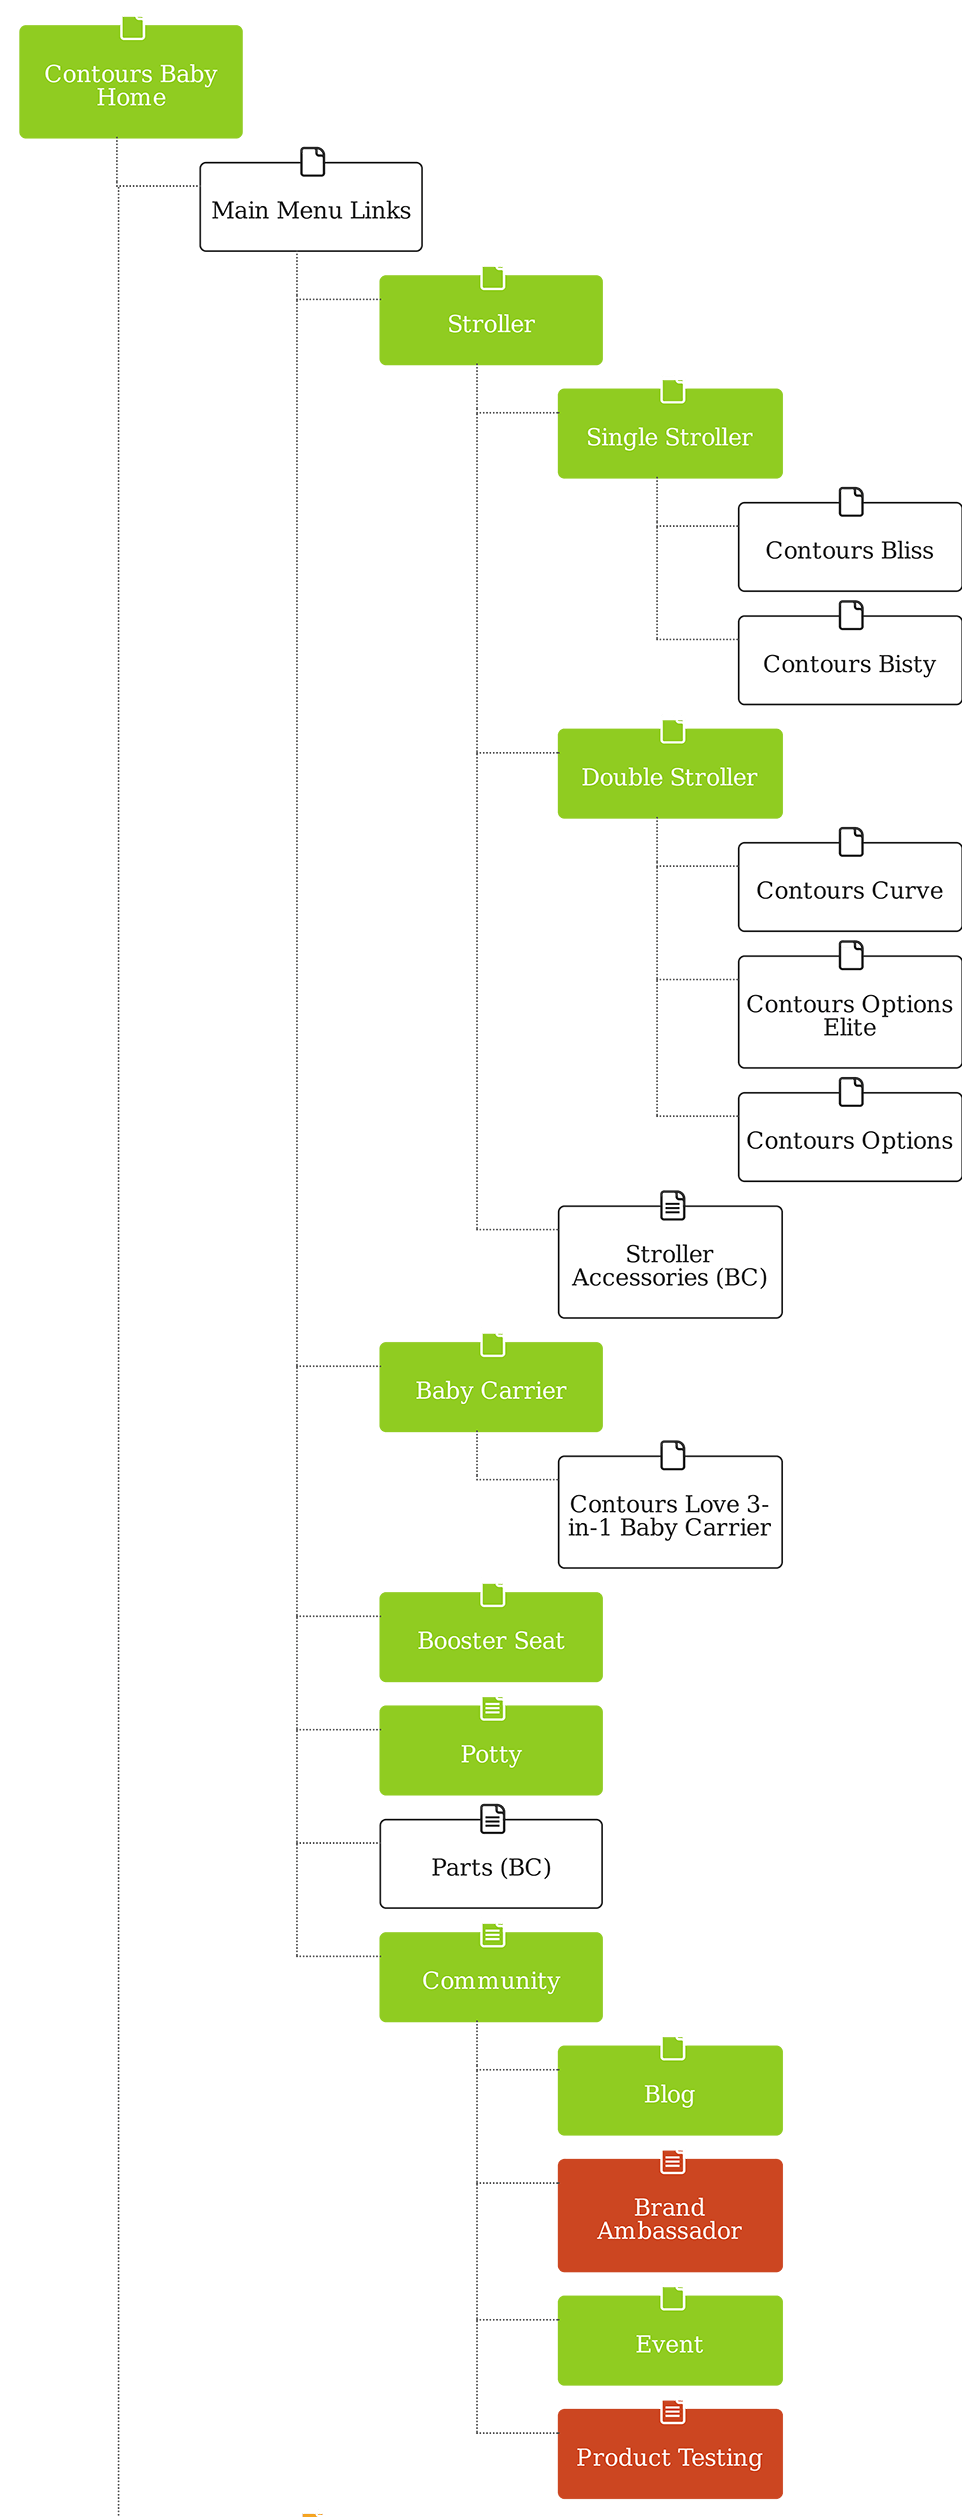 Contours Baby Sitemap